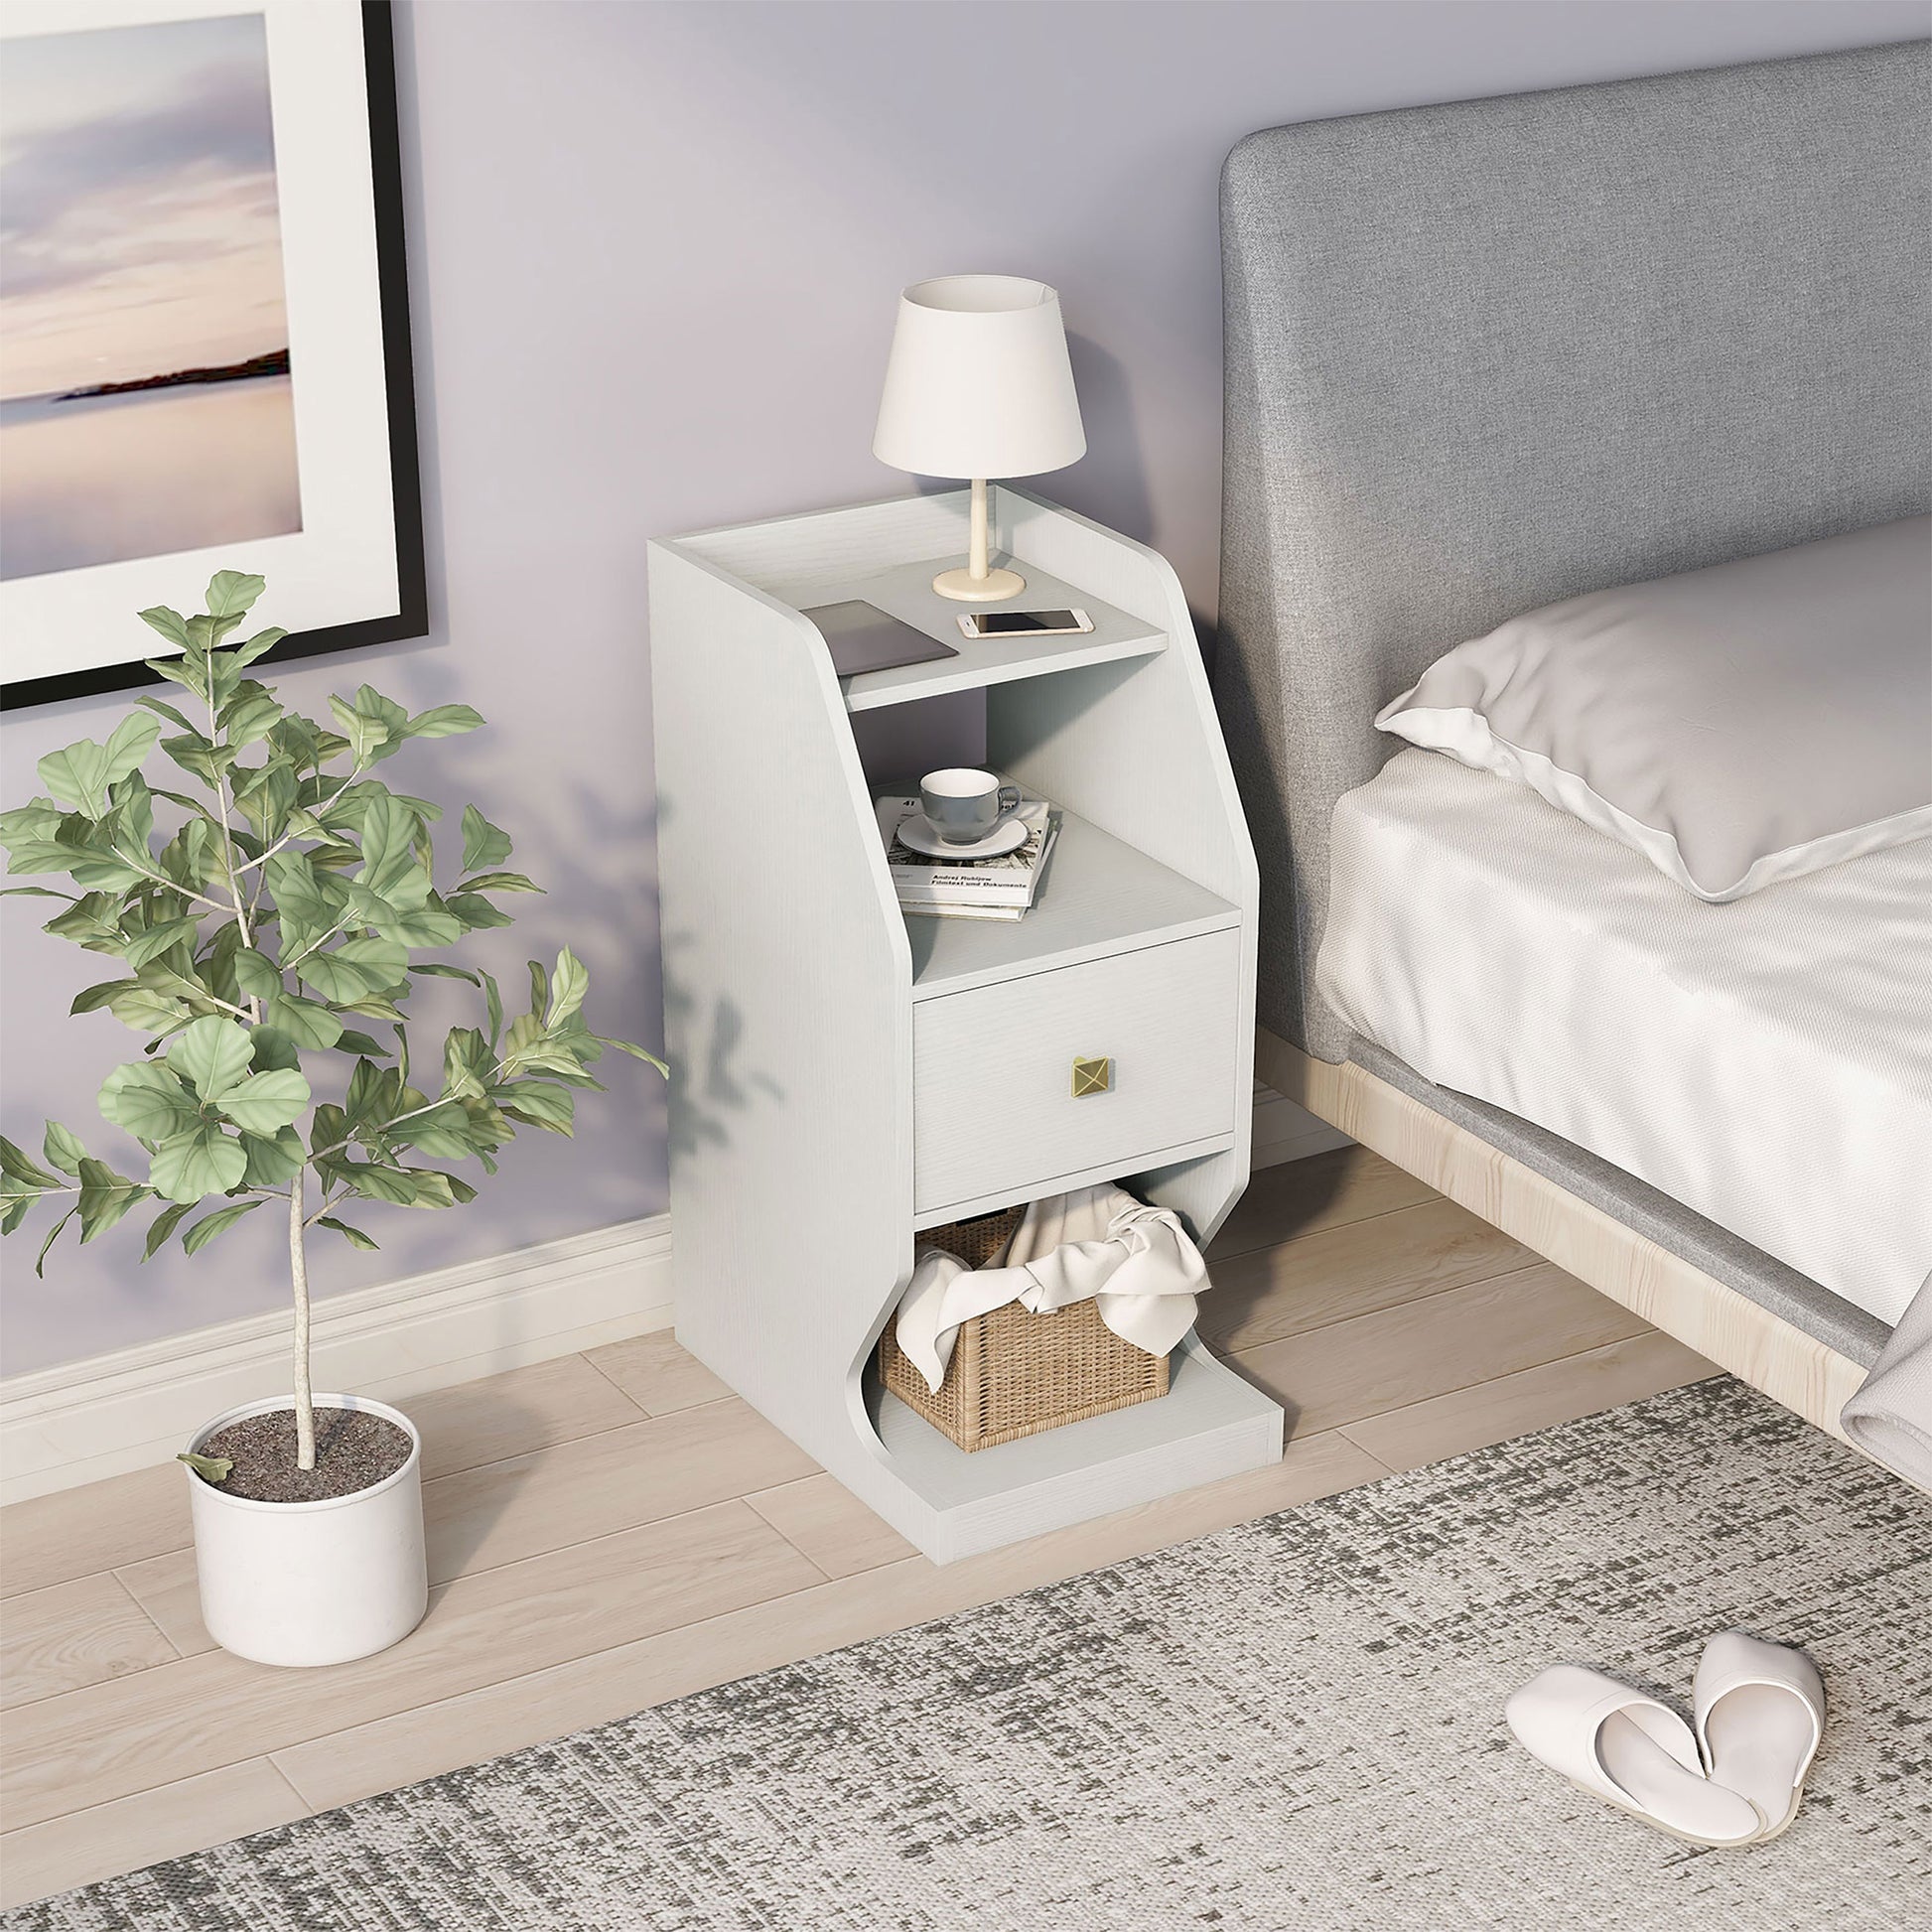 Right angled upper view transitional white tiered one-drawer nightstand in a bedroom with accessories